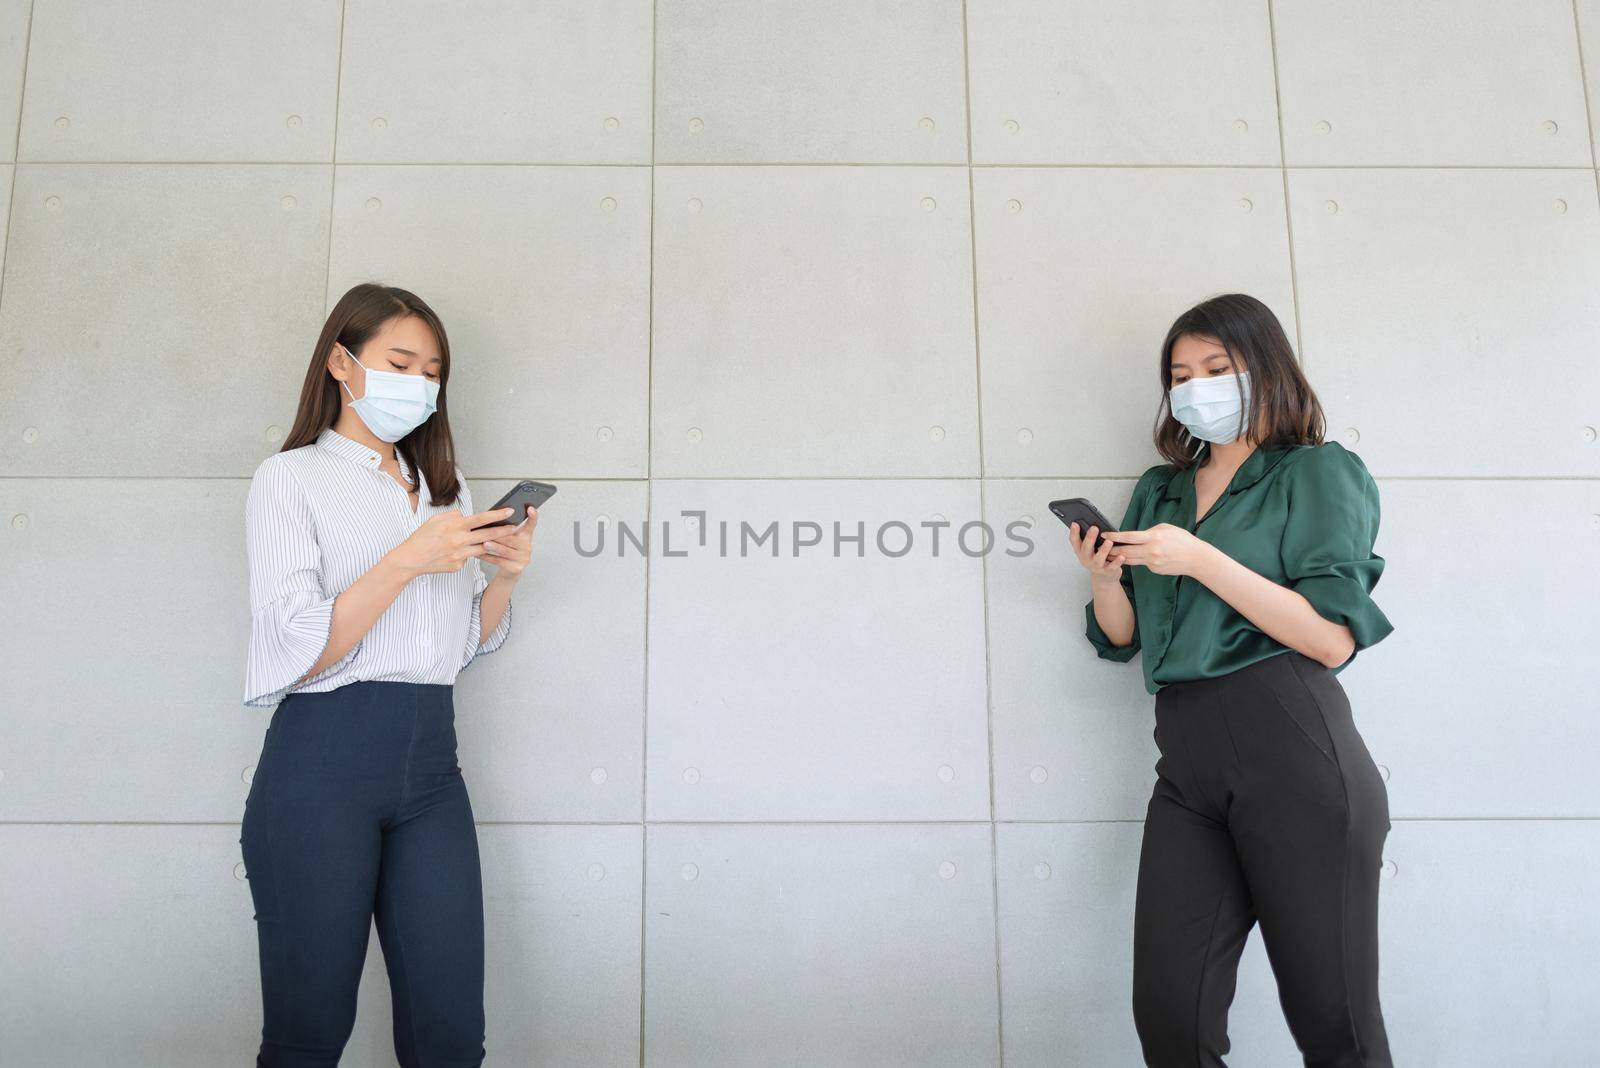 Business employees wearing mask during work in office to keep hygiene follow company policy. by Nuamfolio